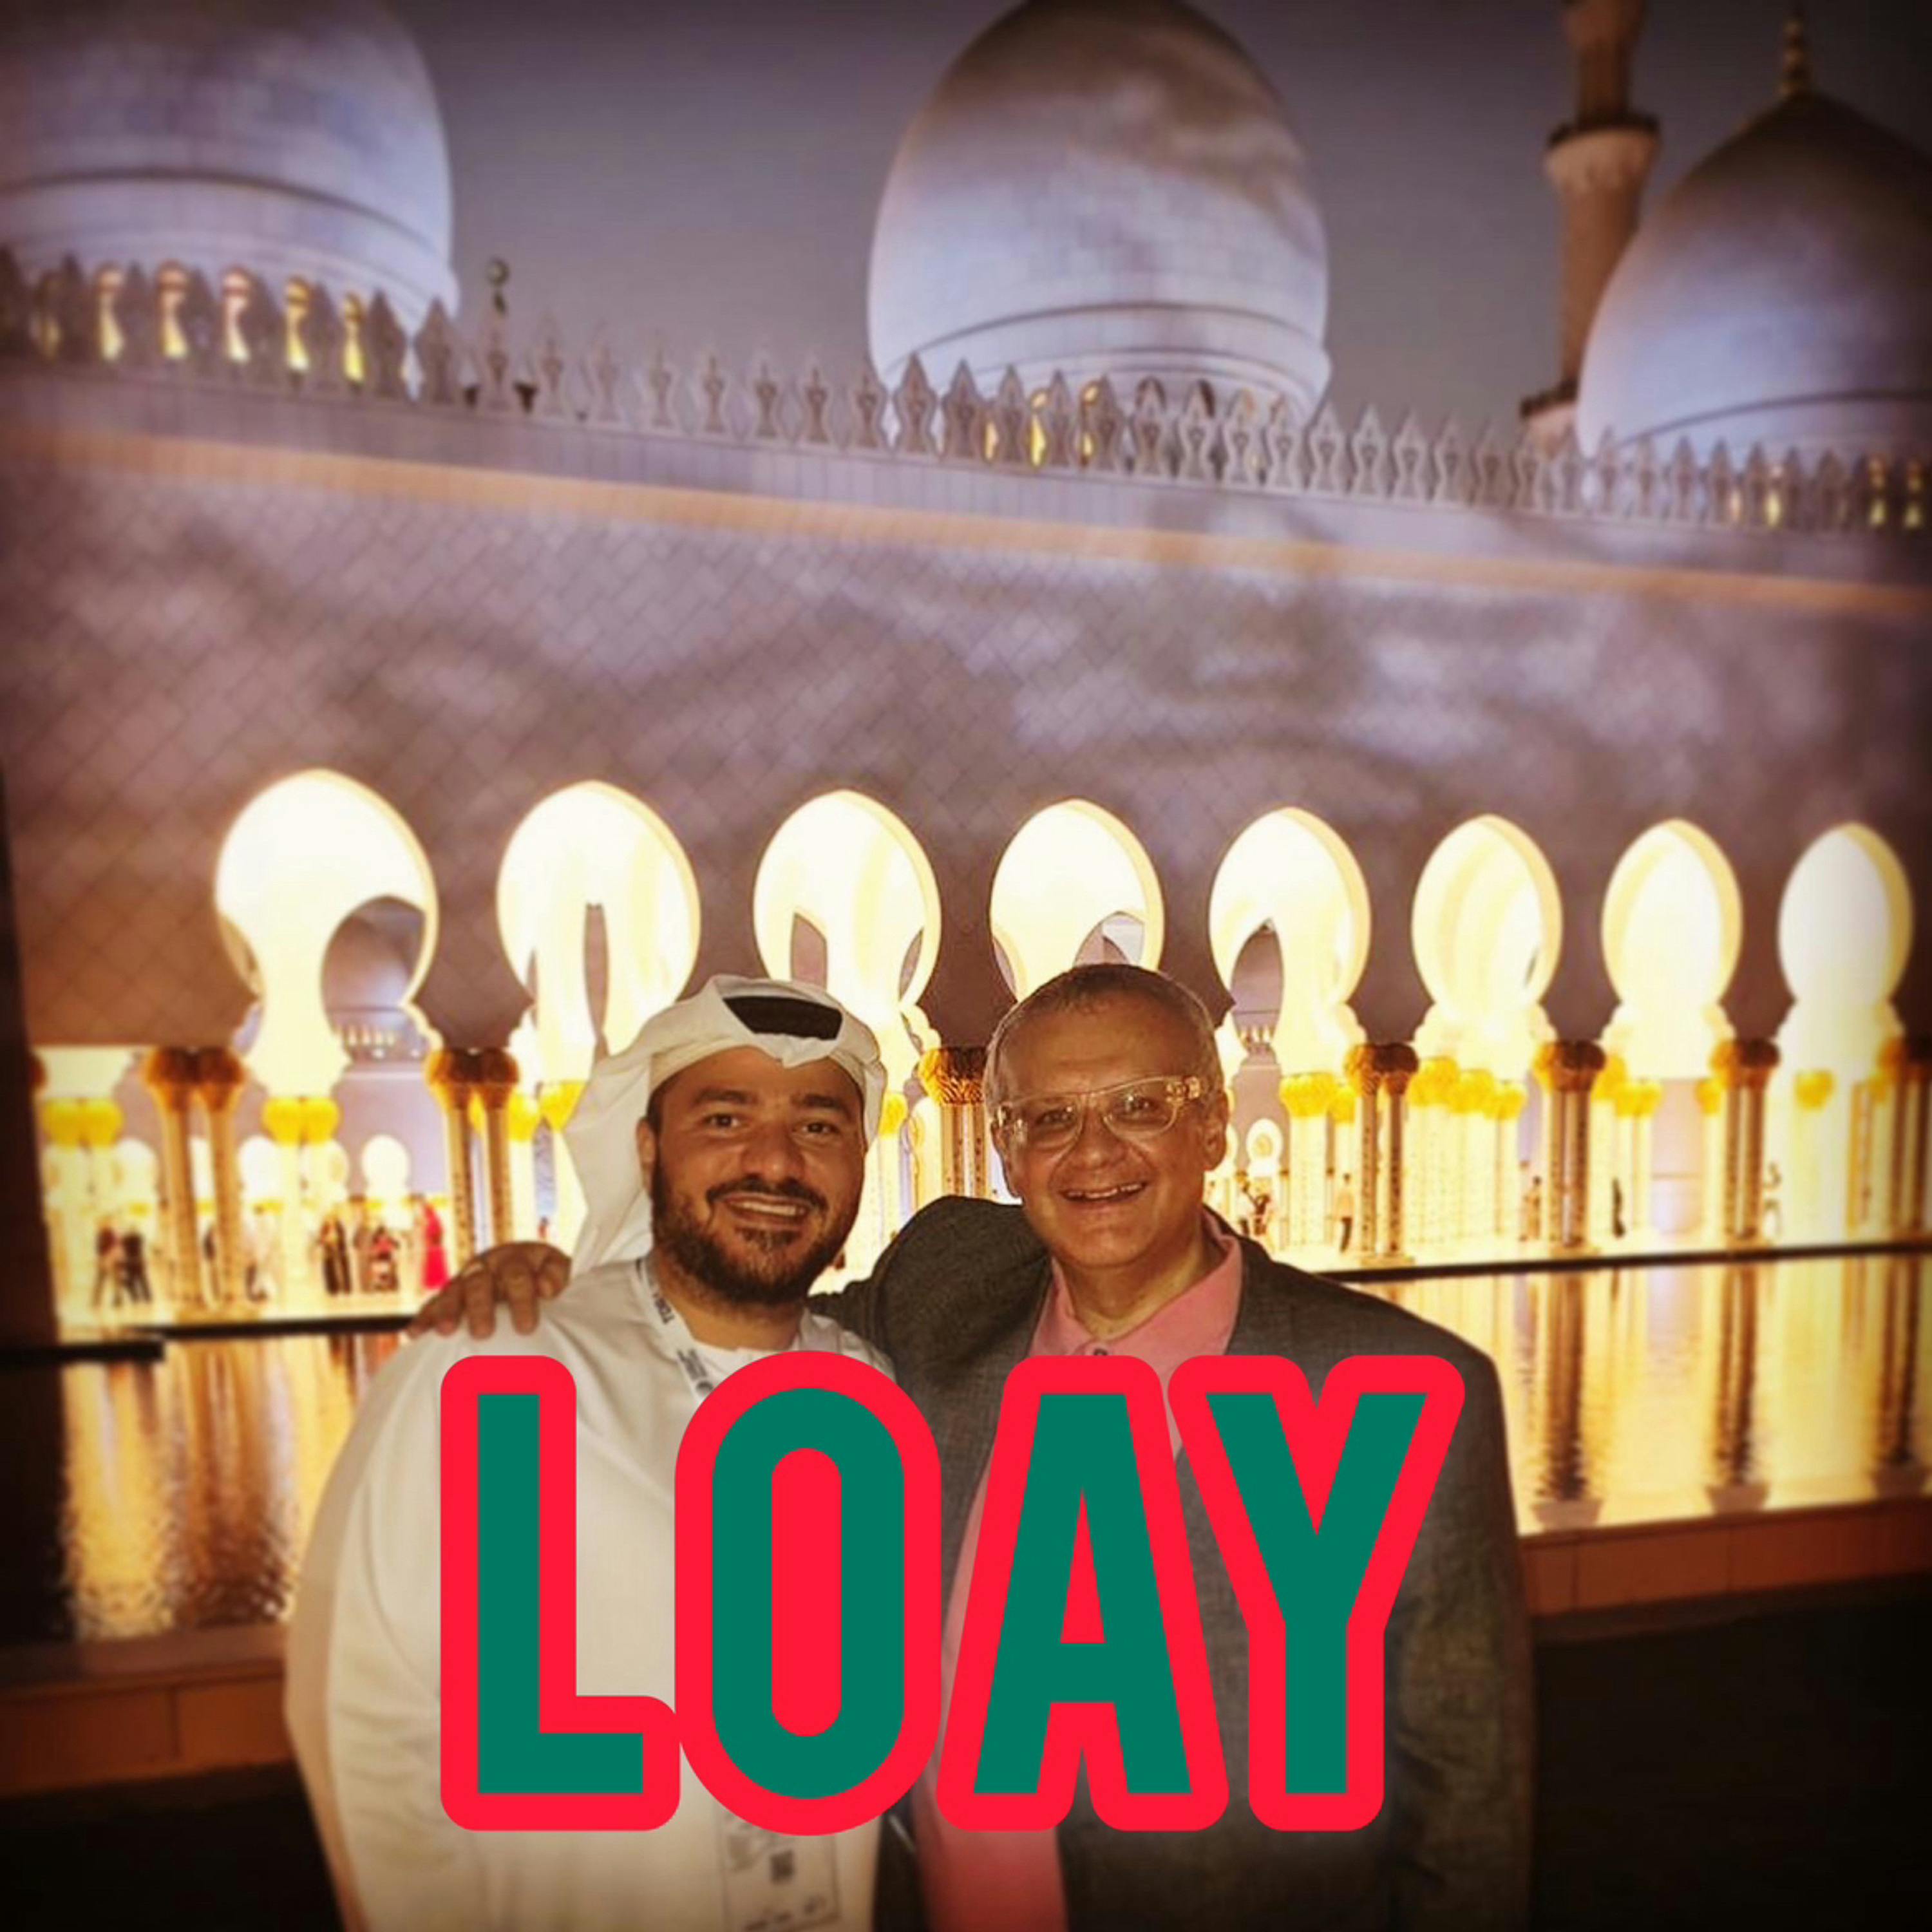 96: Jonny in Abu Dhabi: Loay Alshareef, “Jews and Muslims destined to come together”